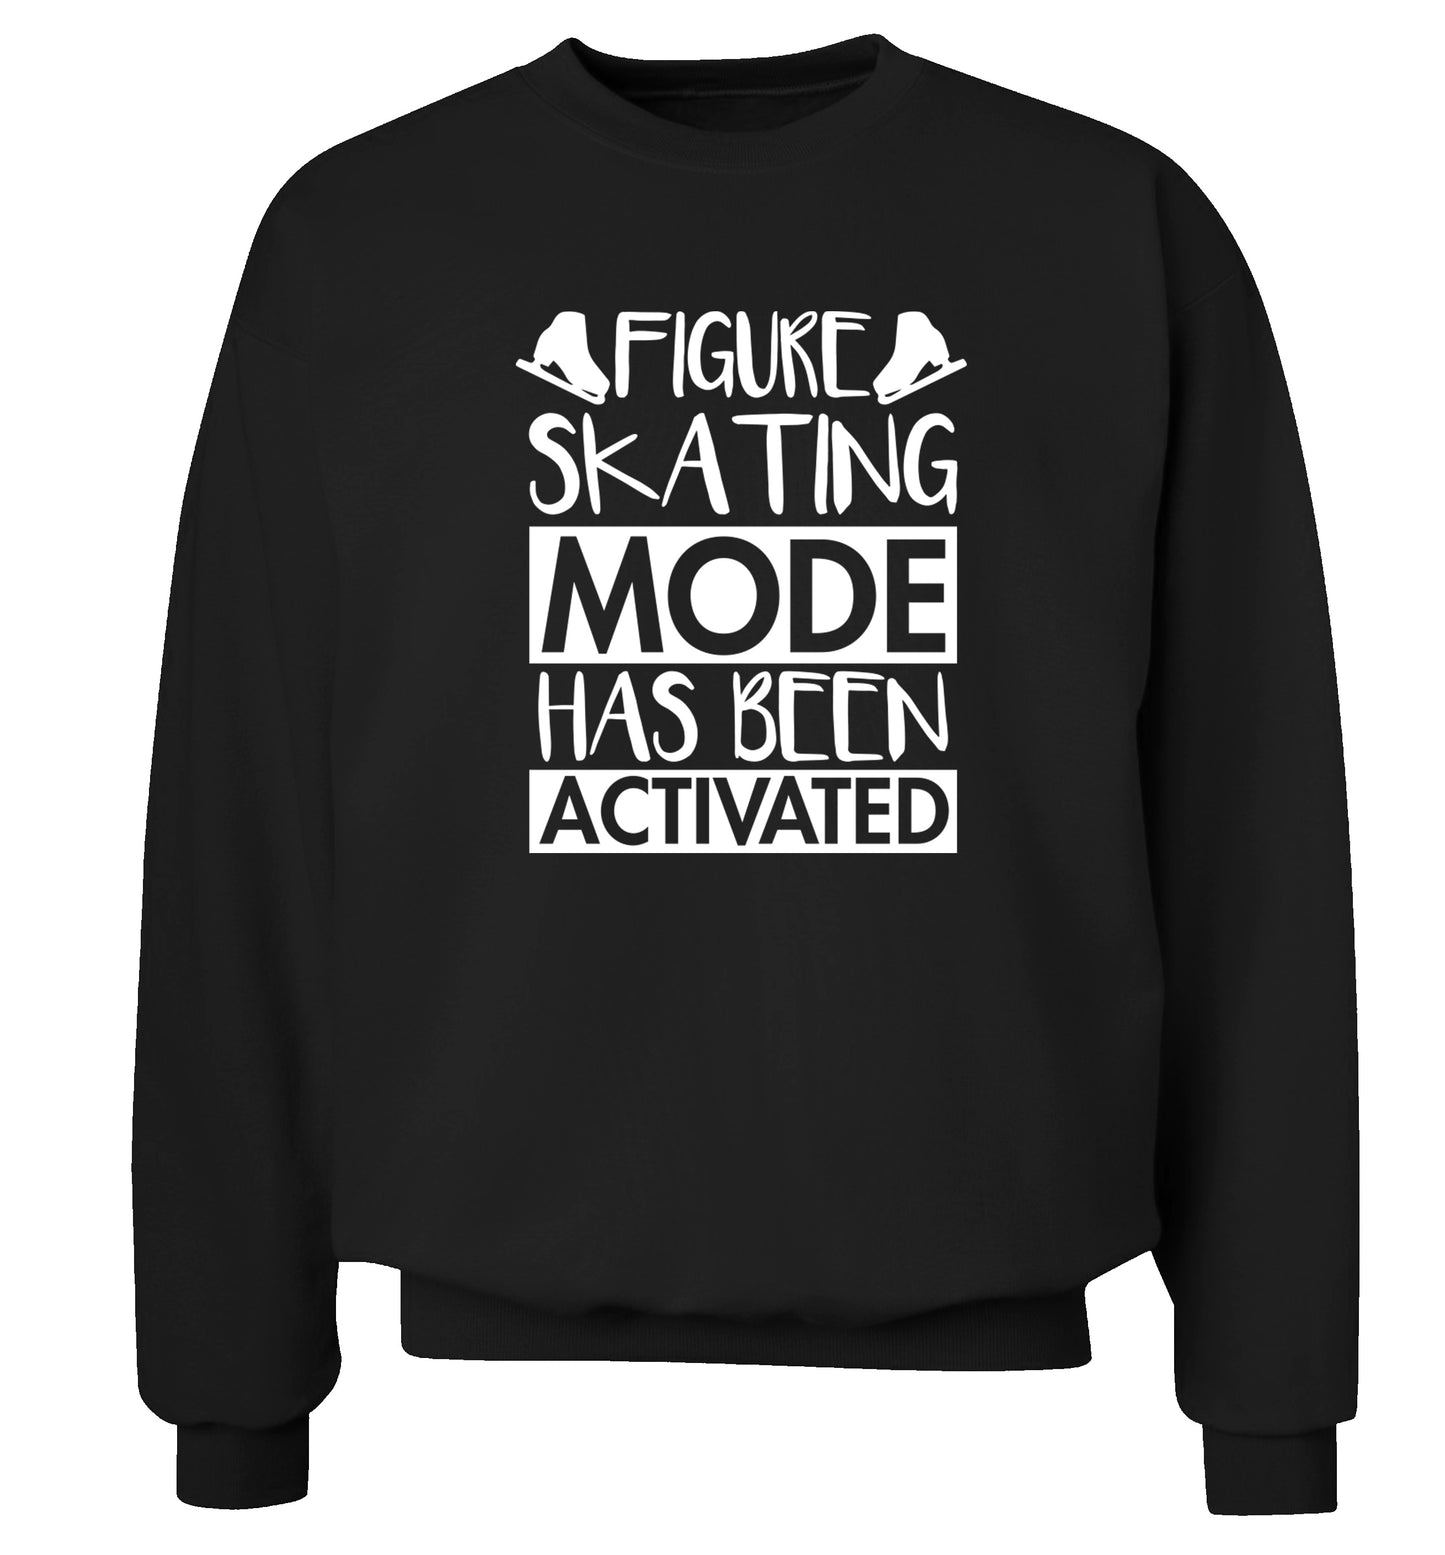 Figure skating mode activated Adult's unisexblack Sweater 2XL